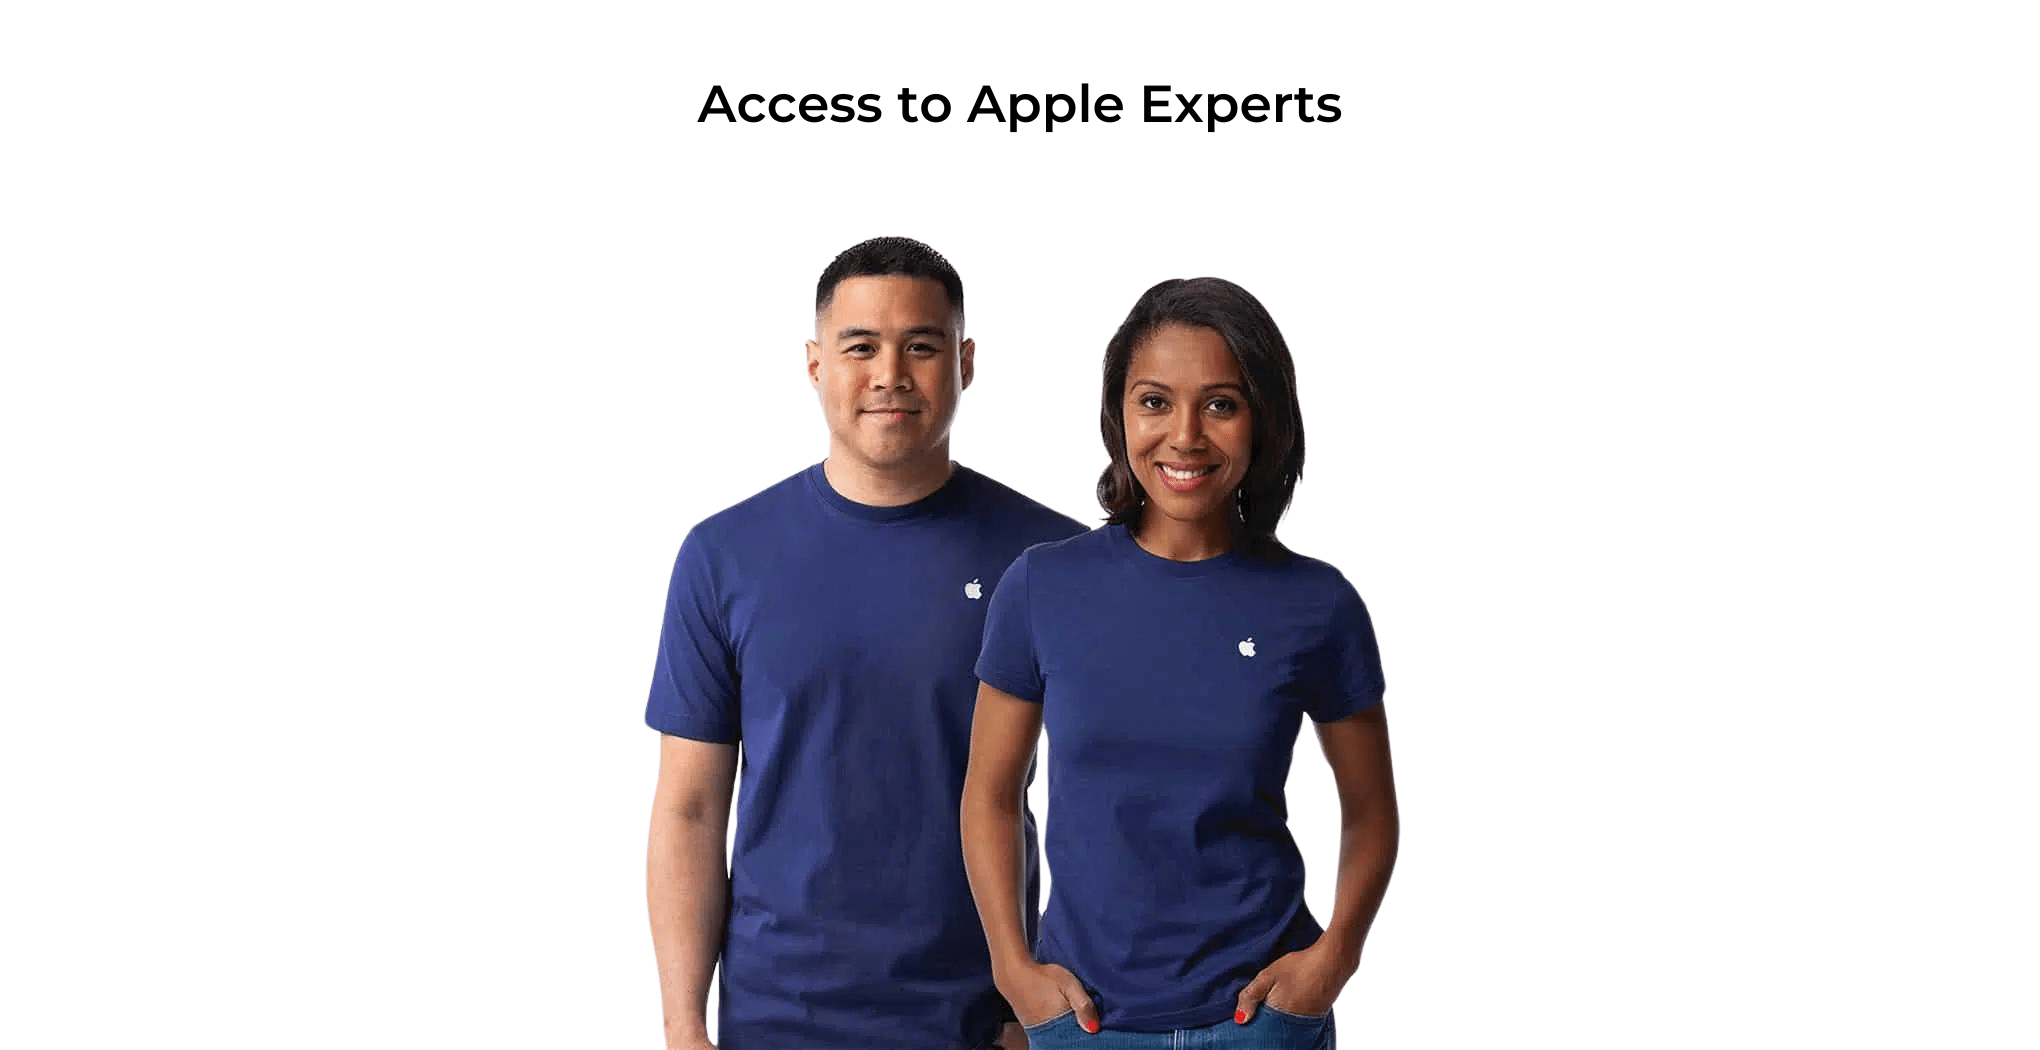 Access to Apple Experts